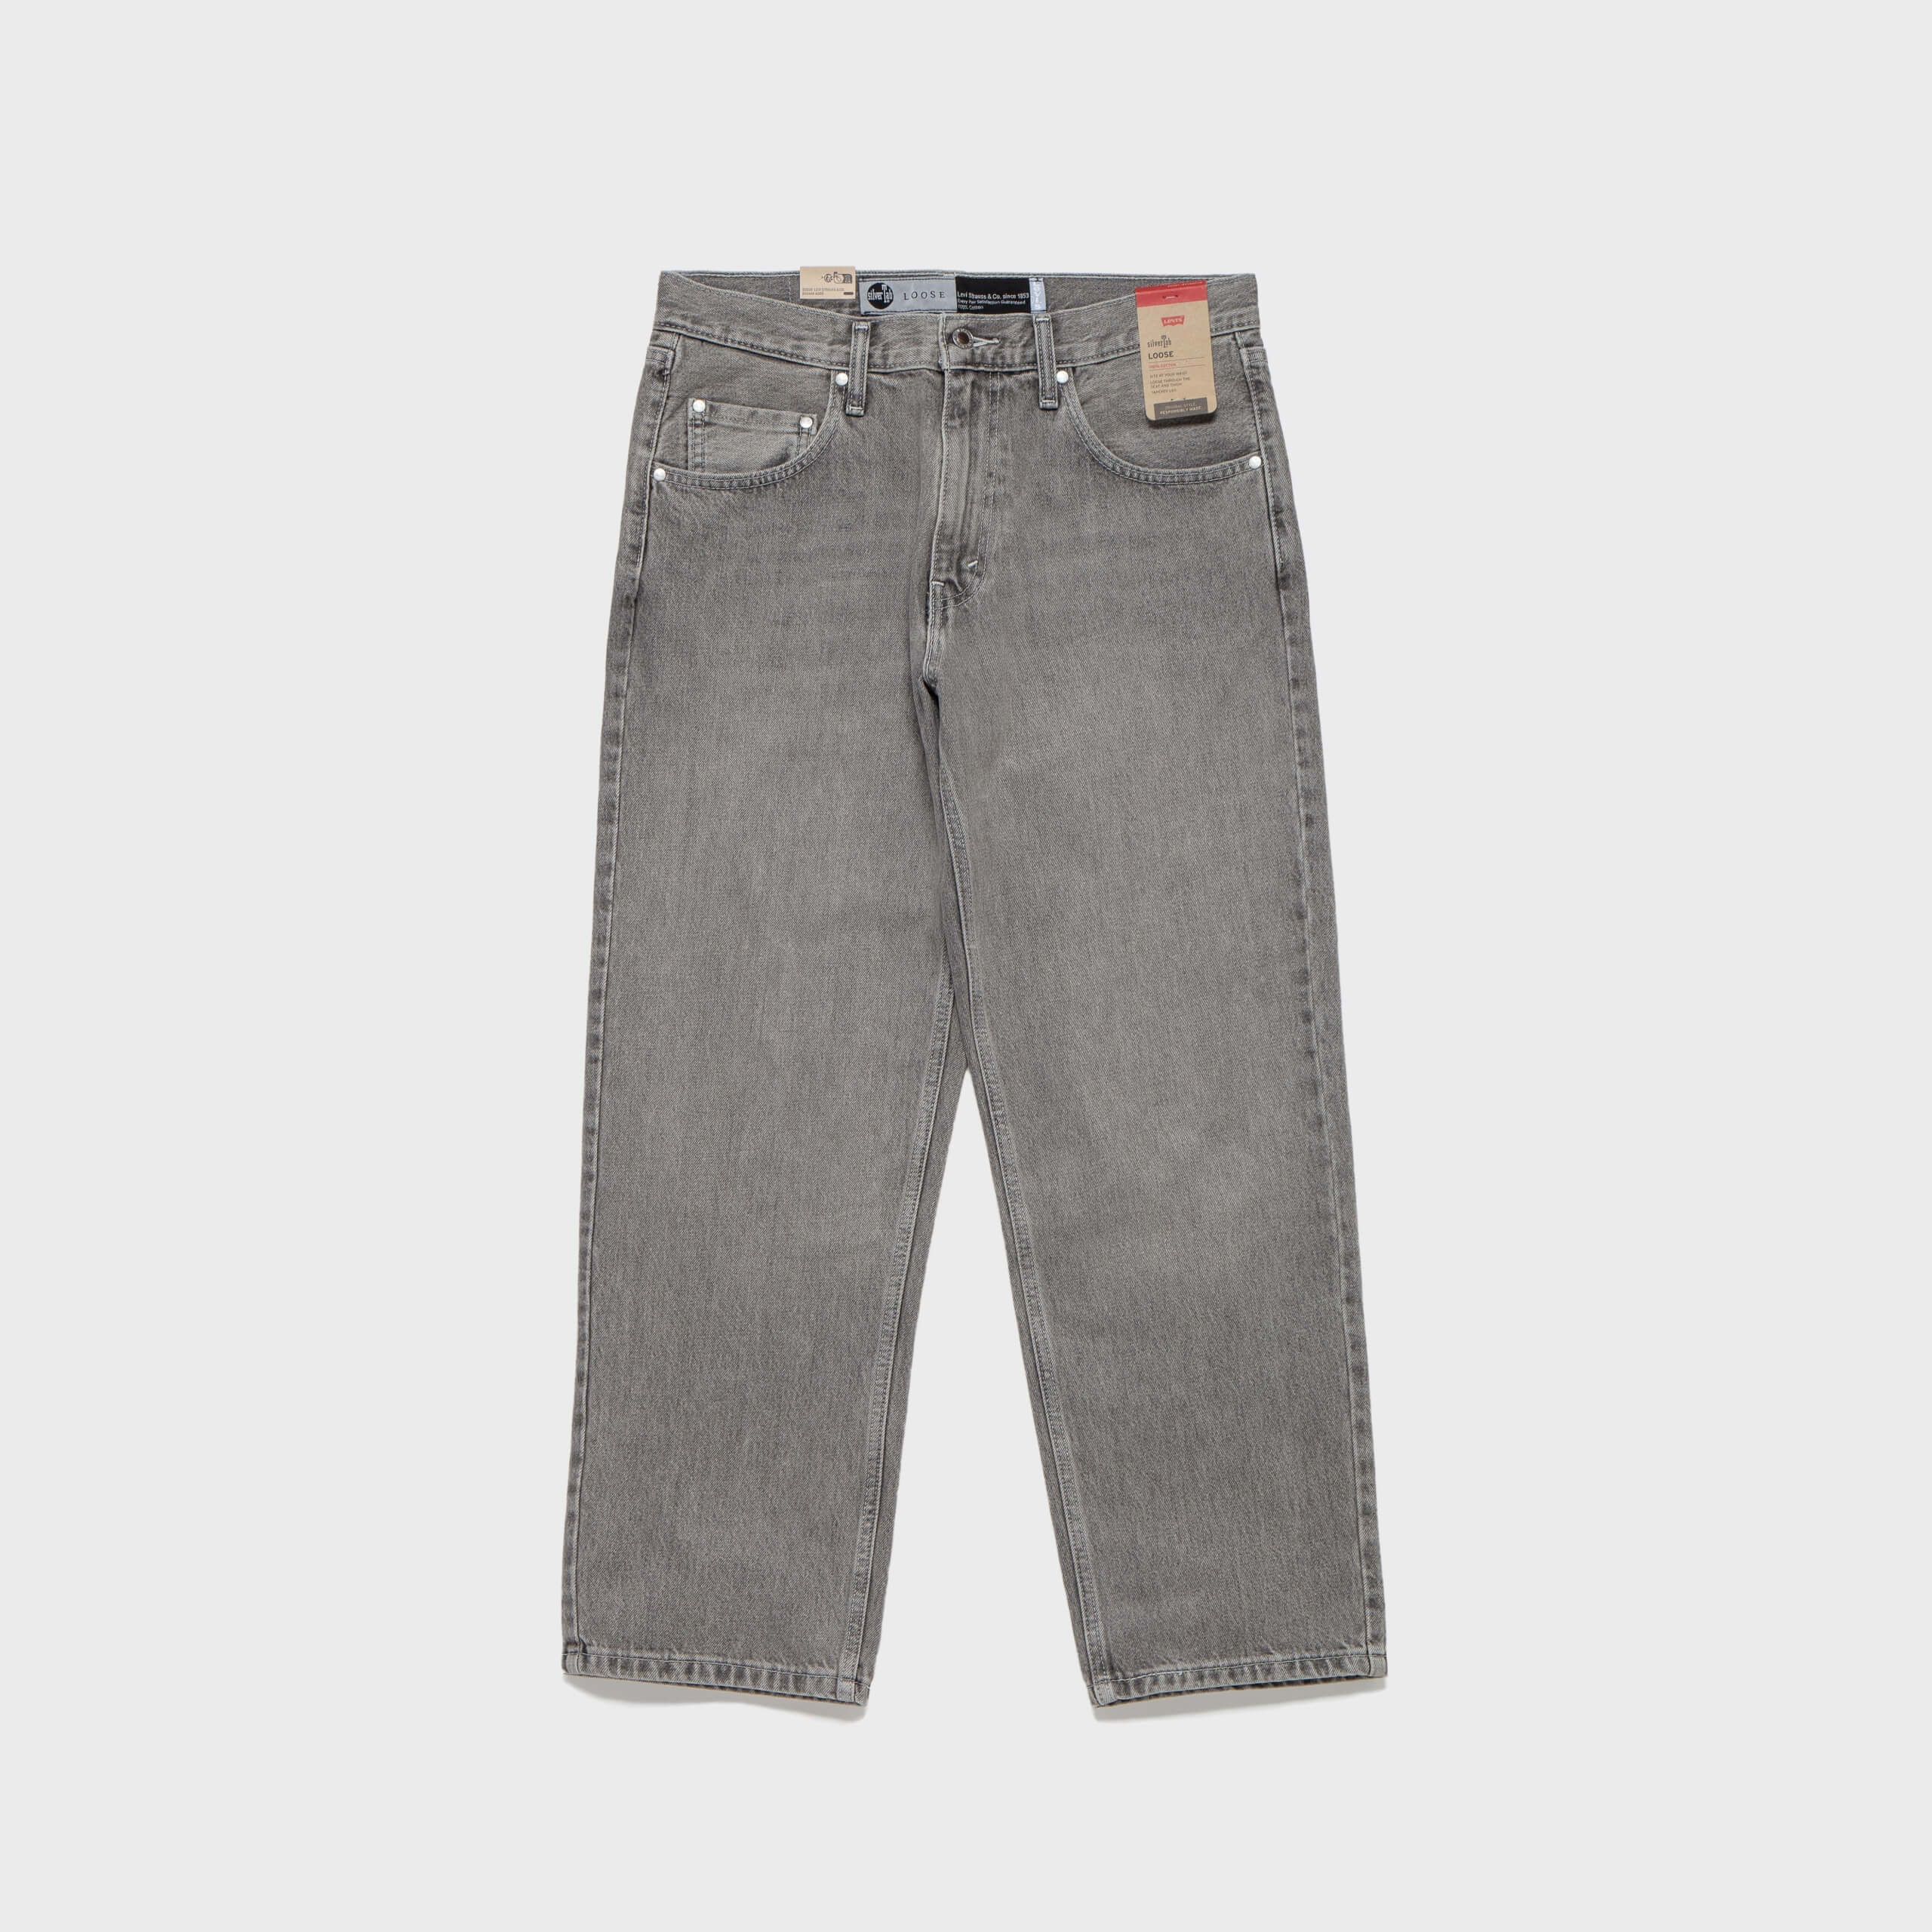 550-92-relaxed-tapered-jeans-light-denim-%e8%a4%87%e8%a3%bd_p2